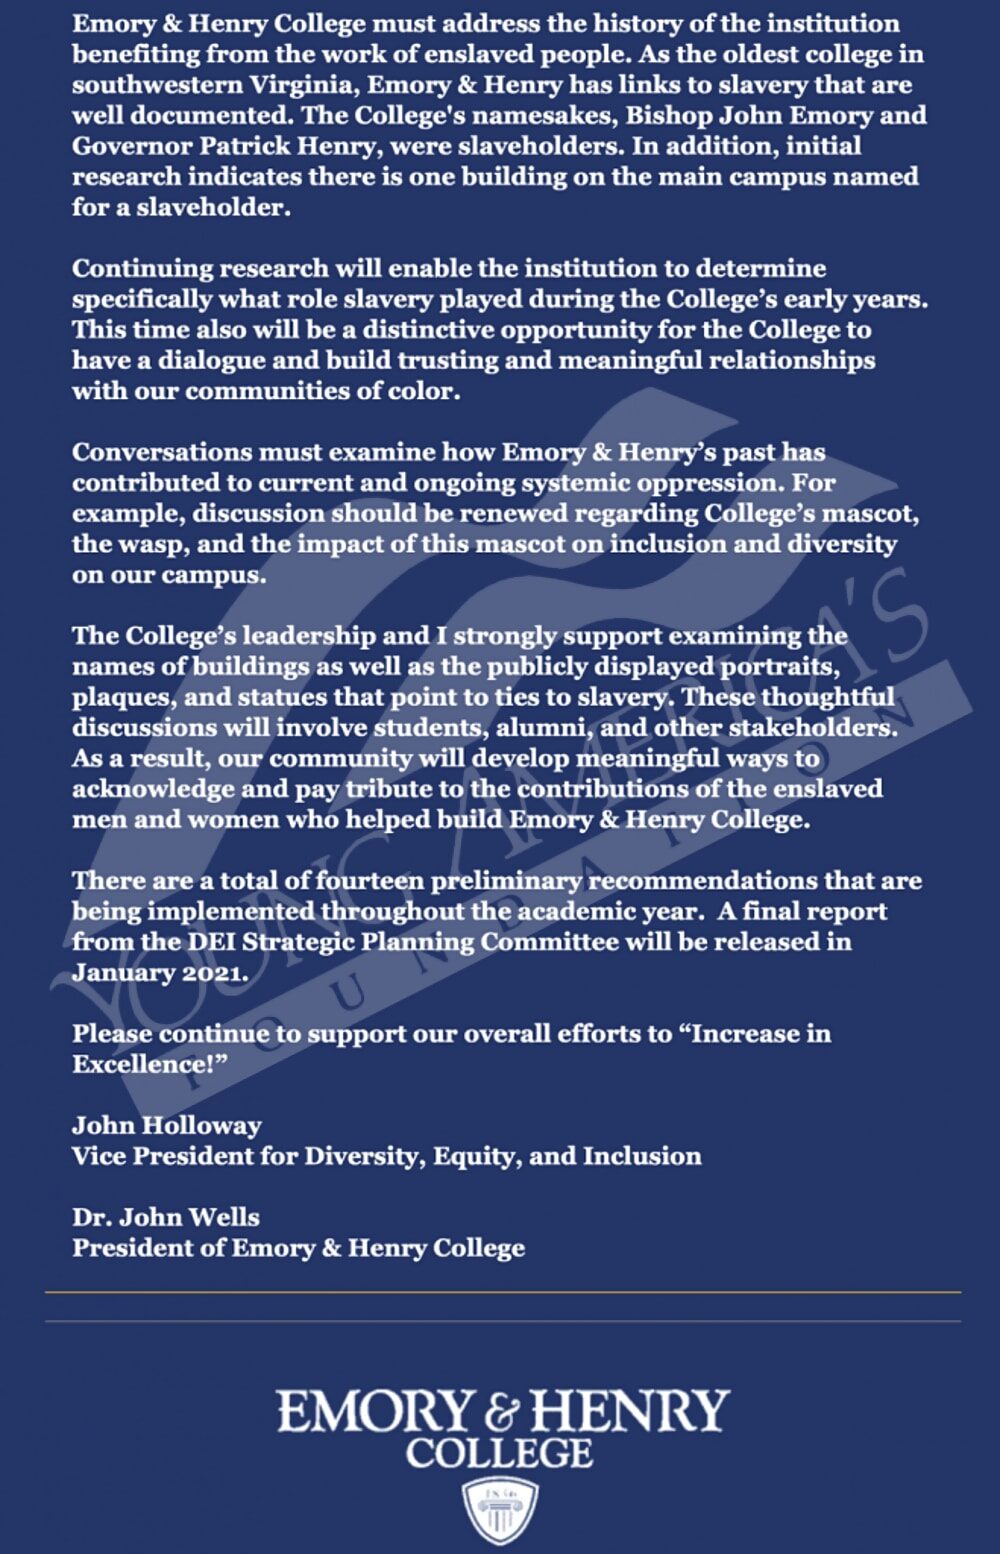 emory & henry college statement mascot racist